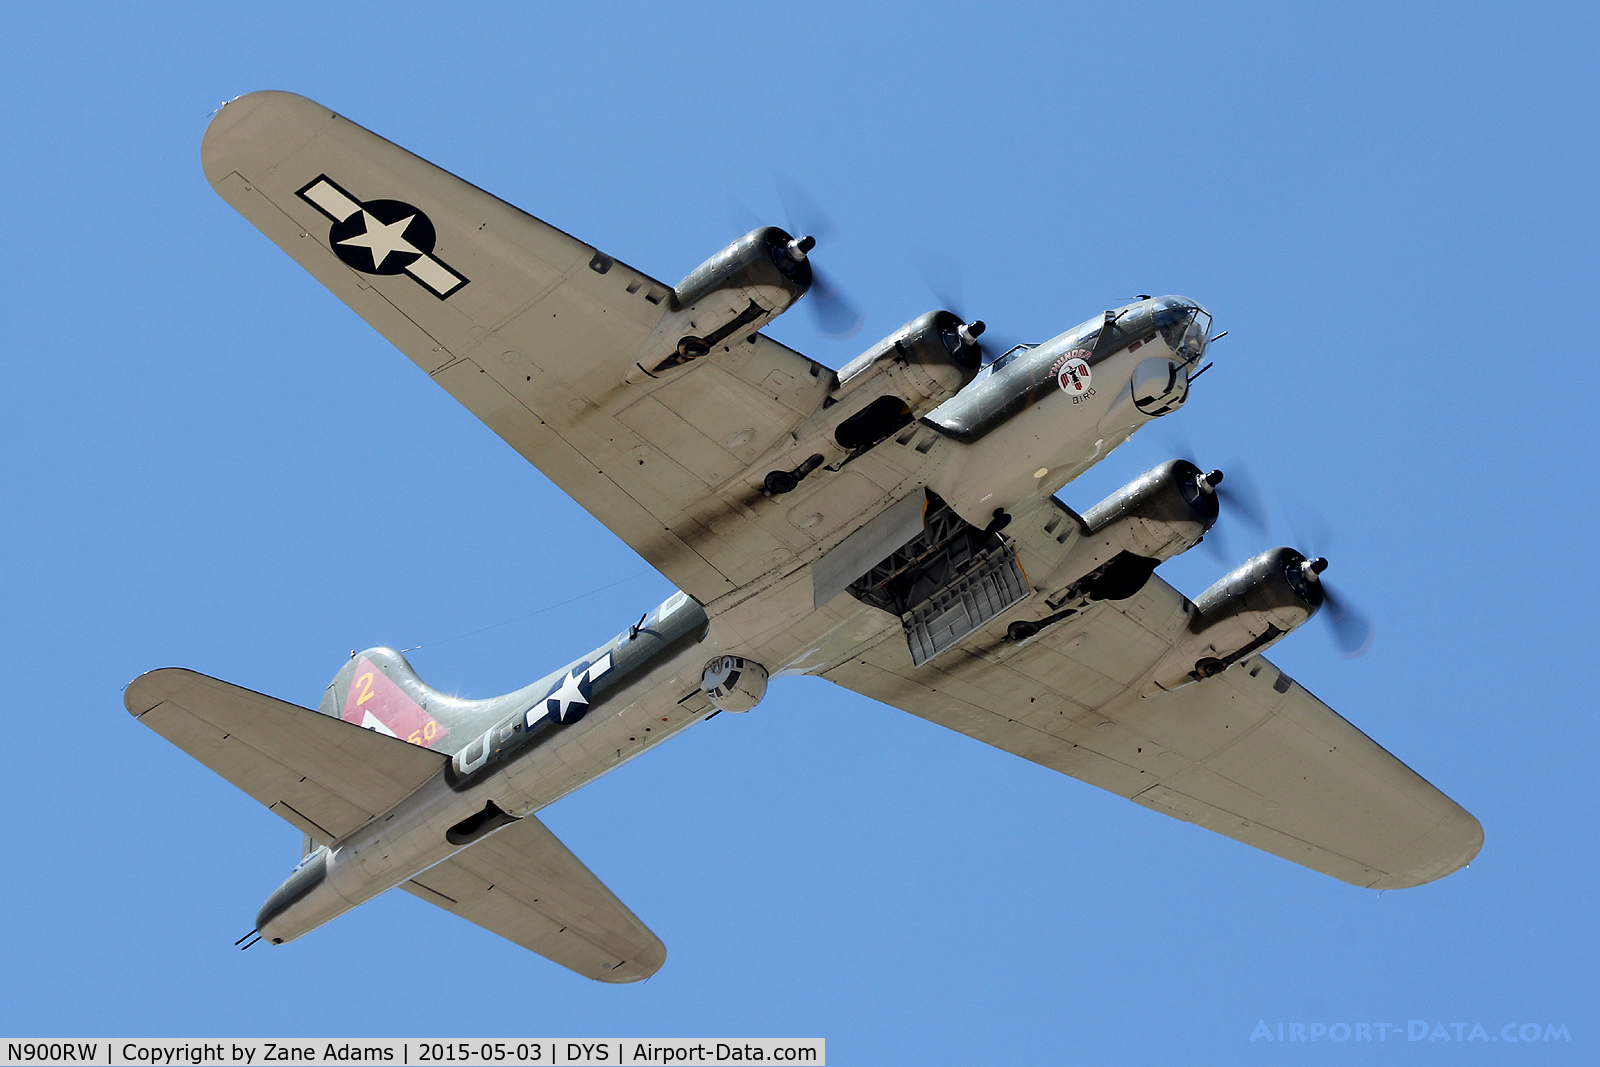 N900RW, 1944 Boeing B-17G Flying Fortress C/N 8627, At the 2014 Big Country Airshow - Dyess AFB, TX